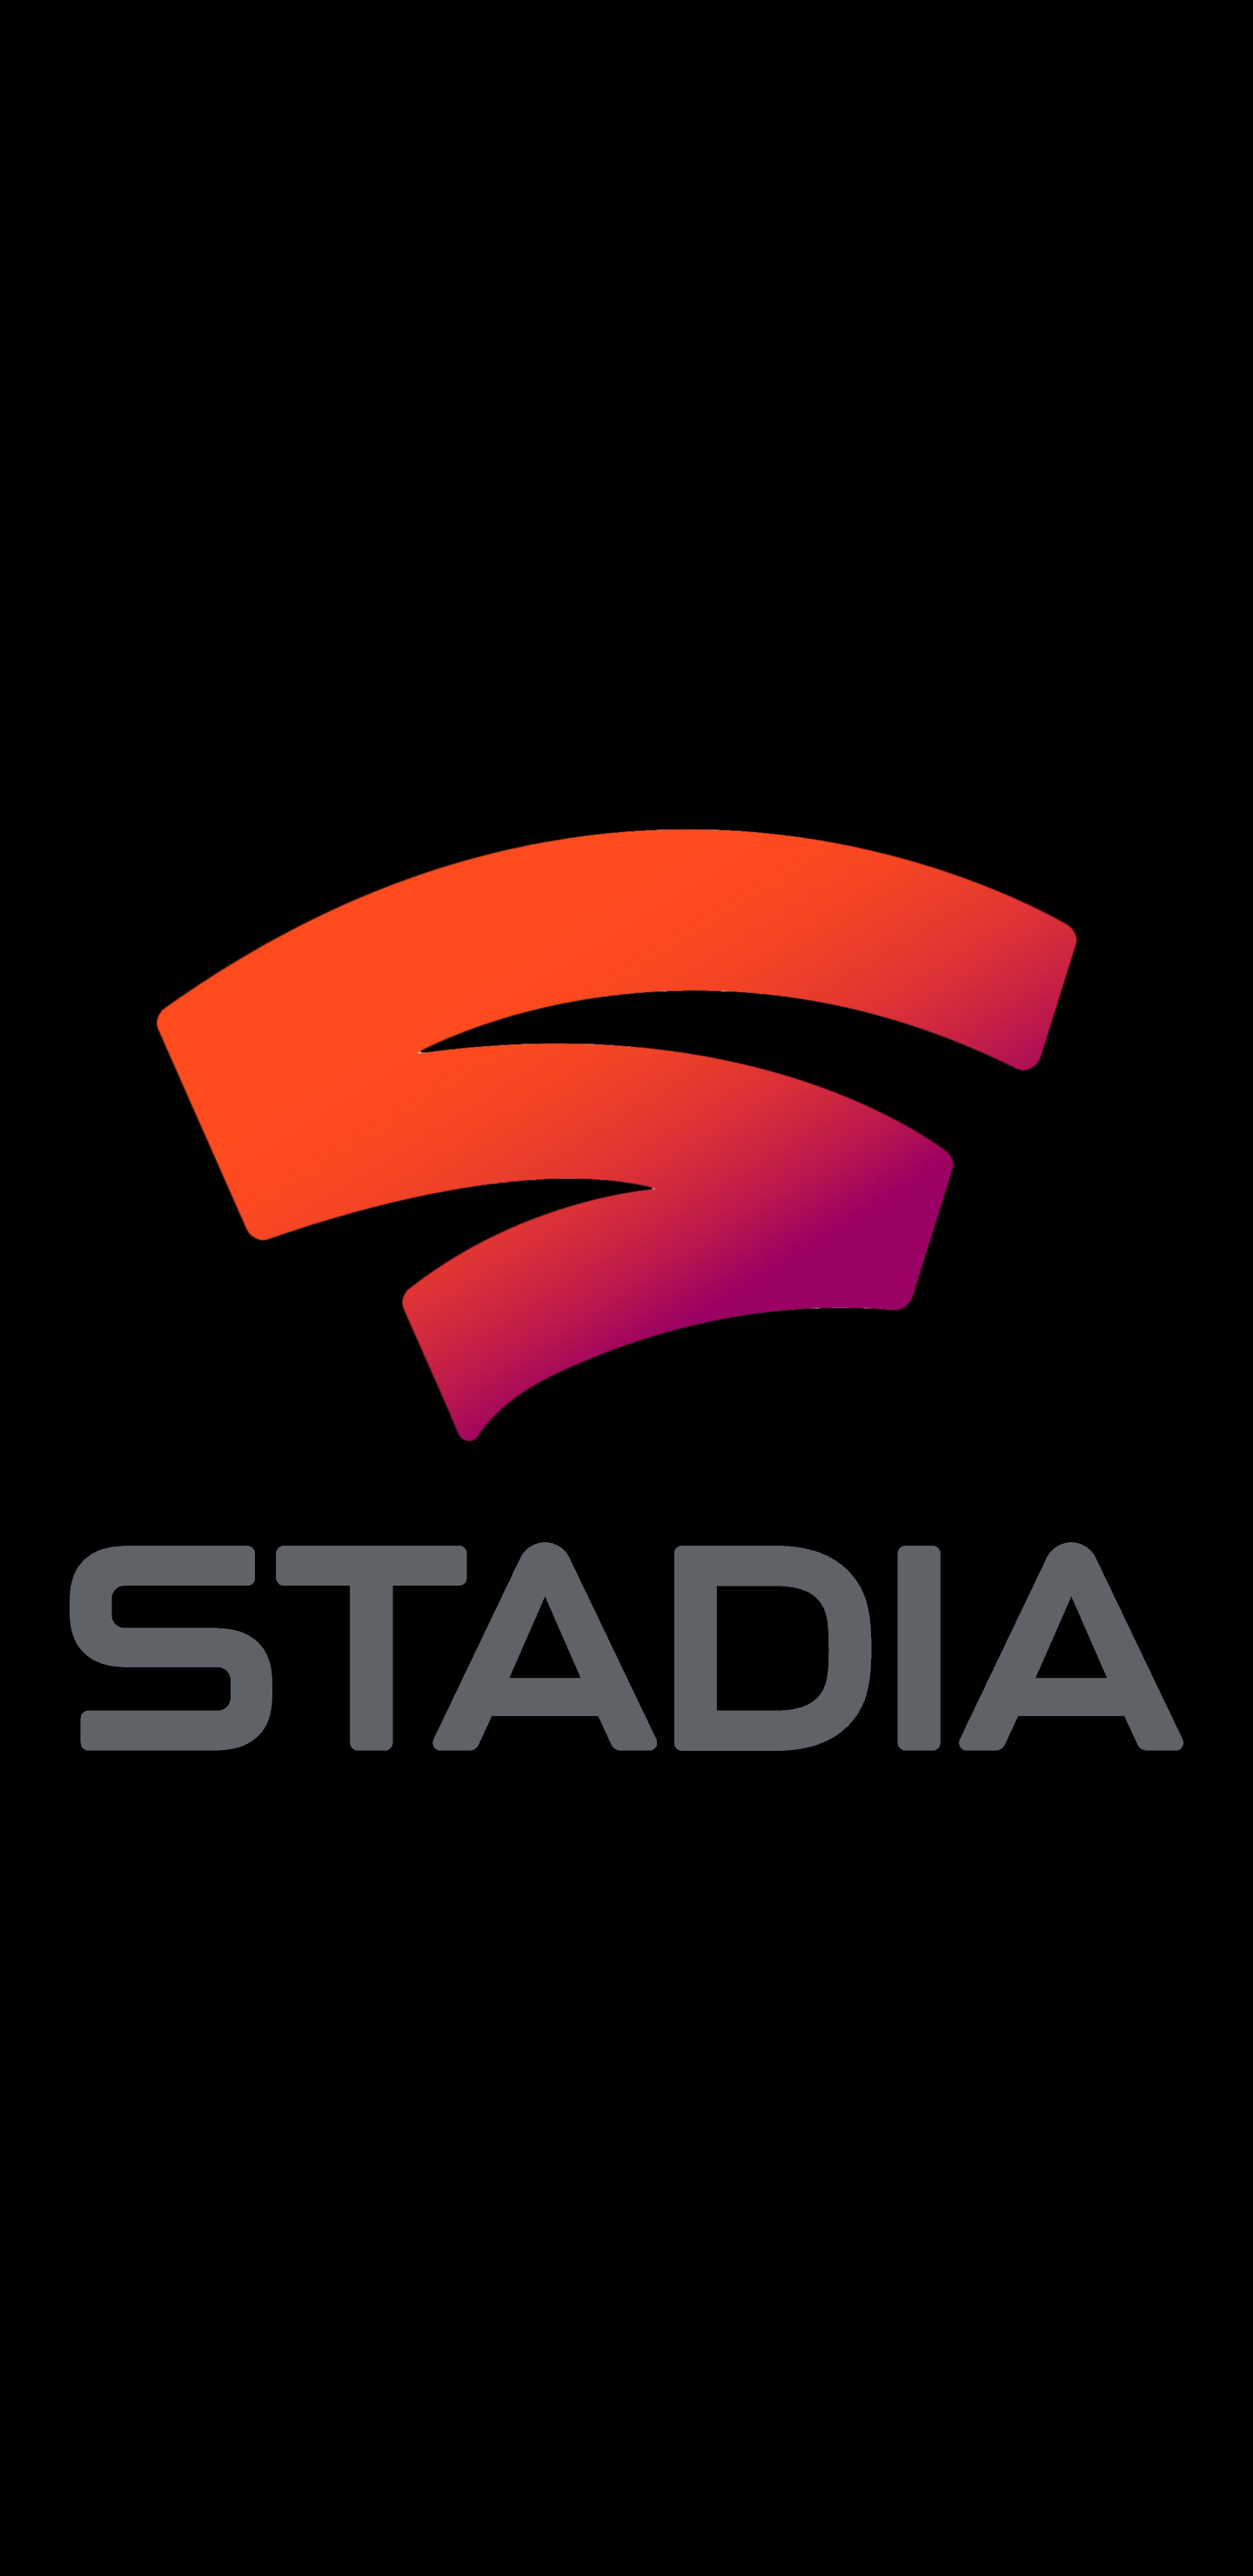 Why Stadia Is Better Than Other Cloud Gaming Platforms, in 5 Points